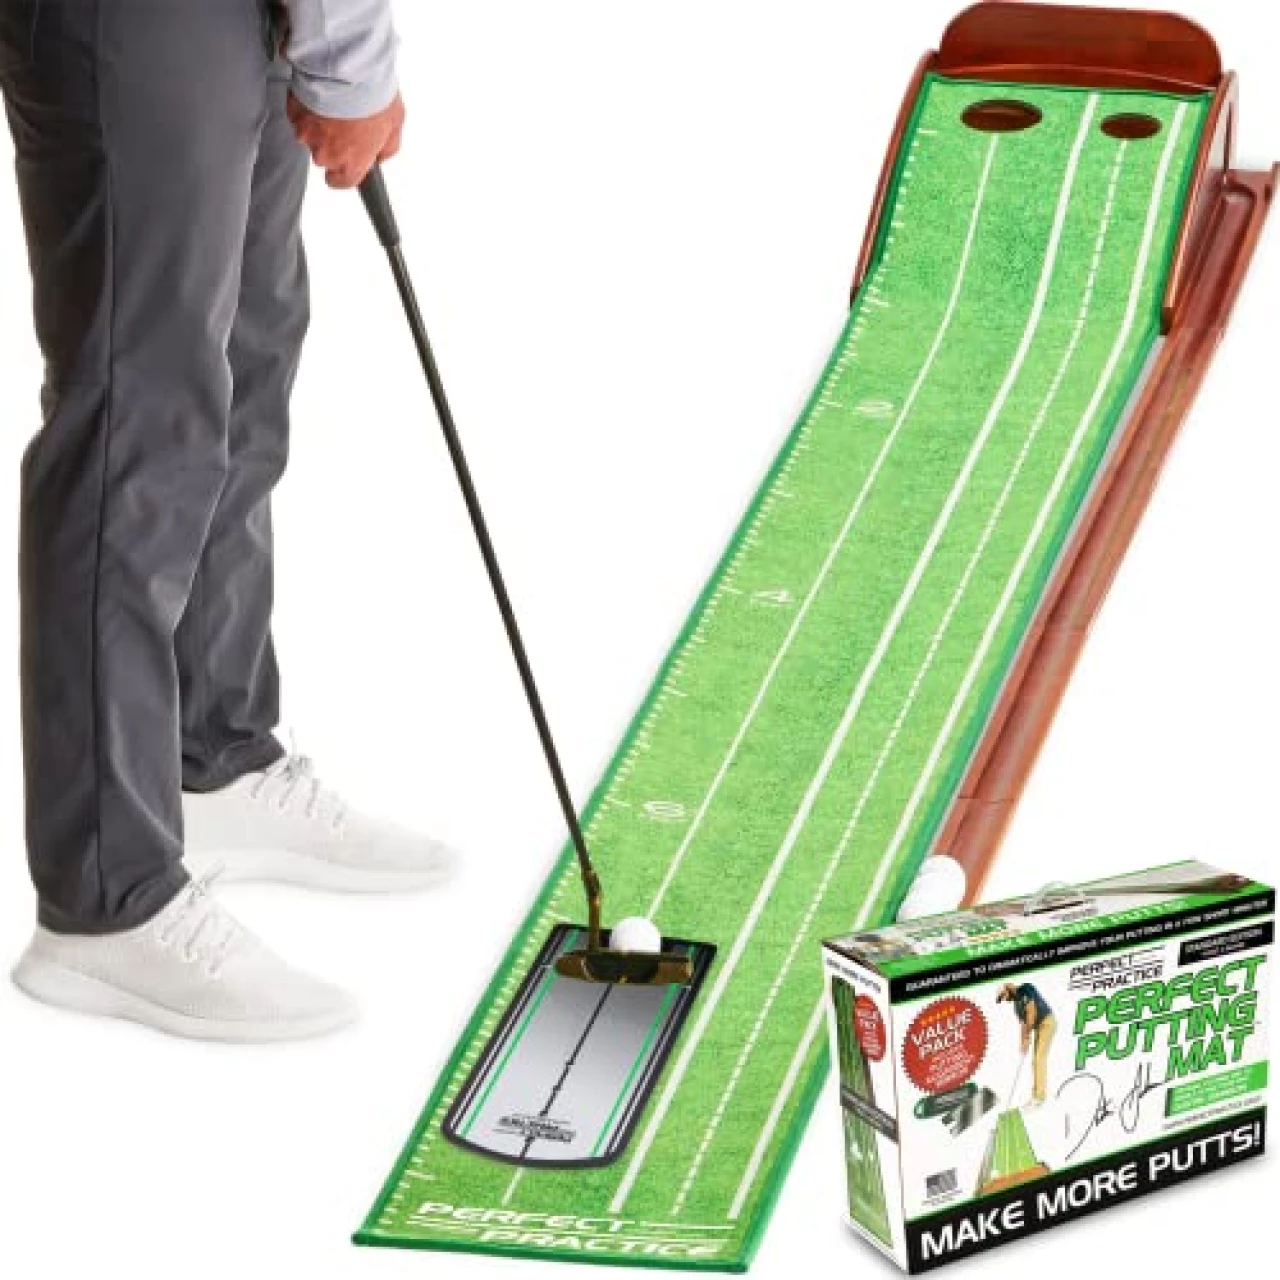 Putting Mat w/Alignment Mirror - Indoor Golf Putting Green w/ 2 Holes - Putting Matt for Indoors Practice - Golf Training Aid for Home - Golf Accessories and Gifts for Men